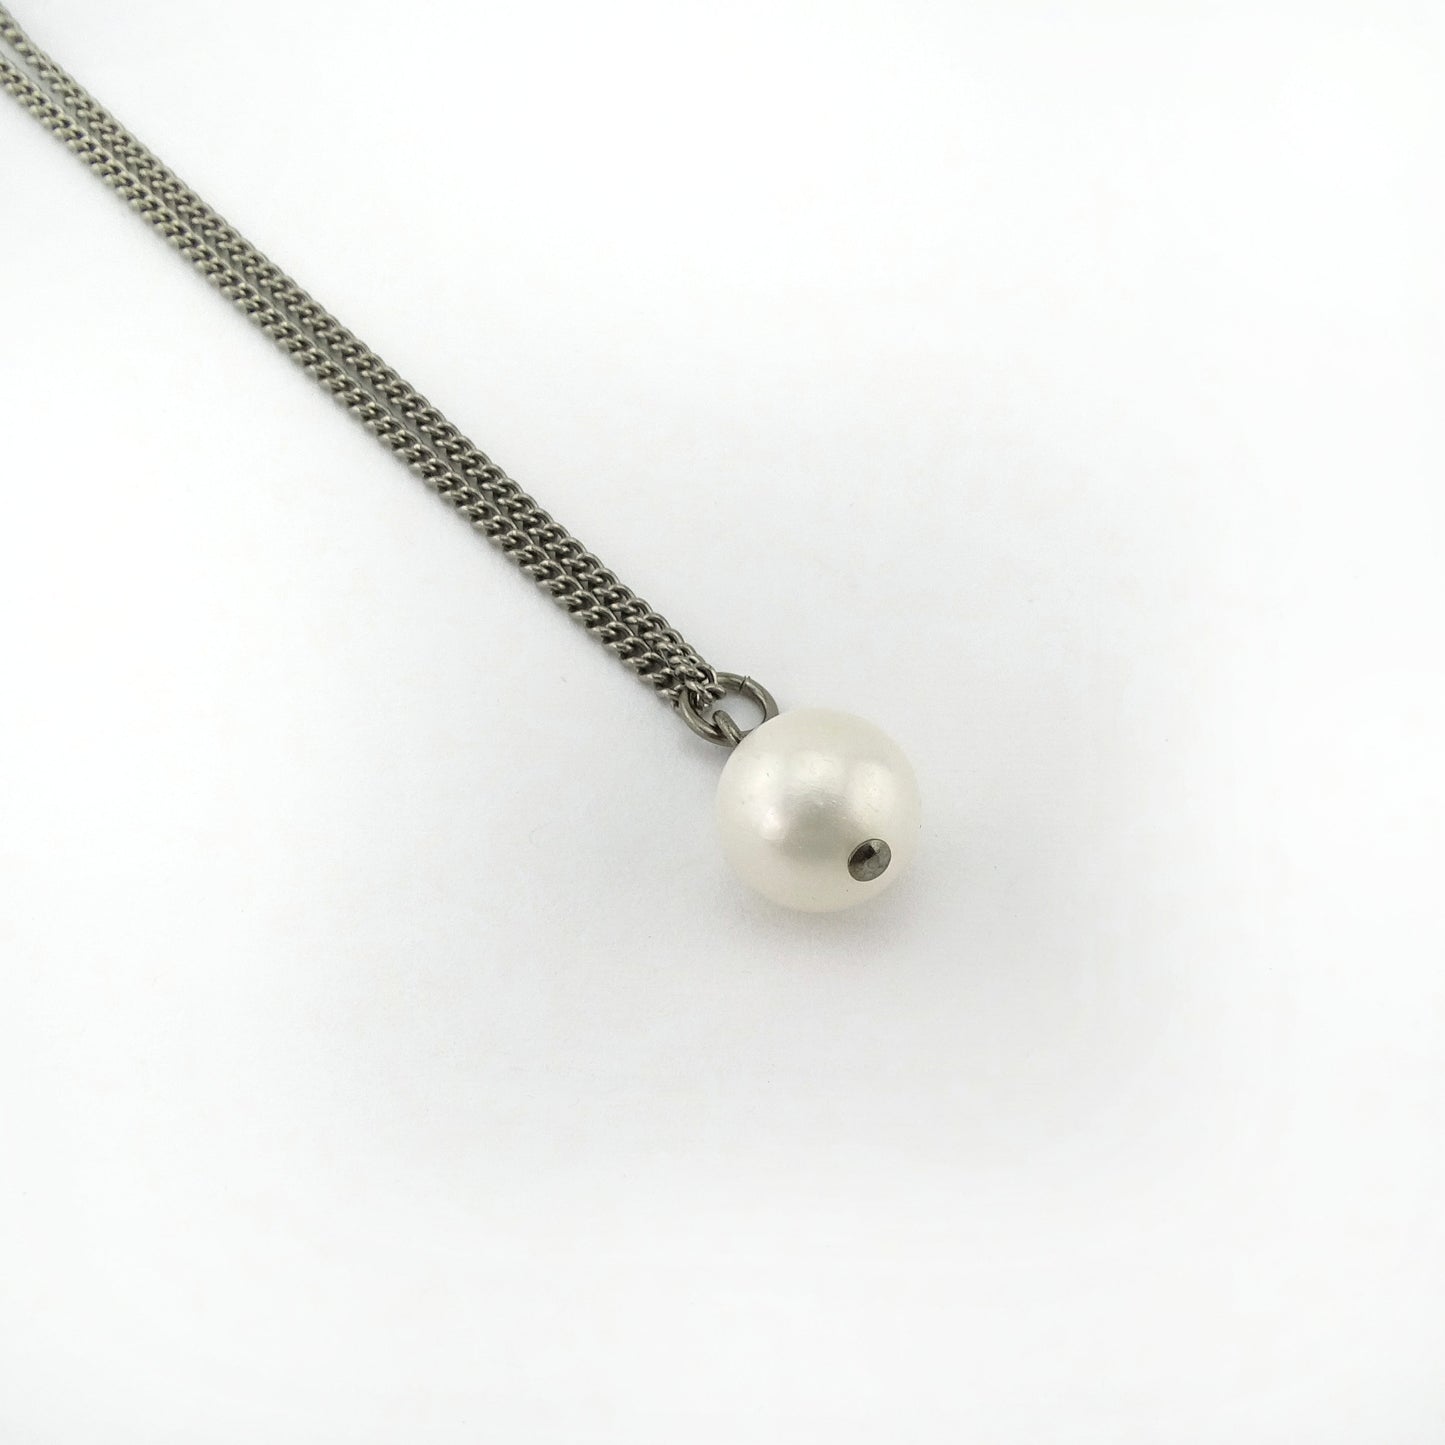 Big Freshwater Pearl Titanium Necklace, Genuine White Pearl, Real Pearl Necklace, Hypoallergenic Nickel Free Necklace for Sensitive Skin